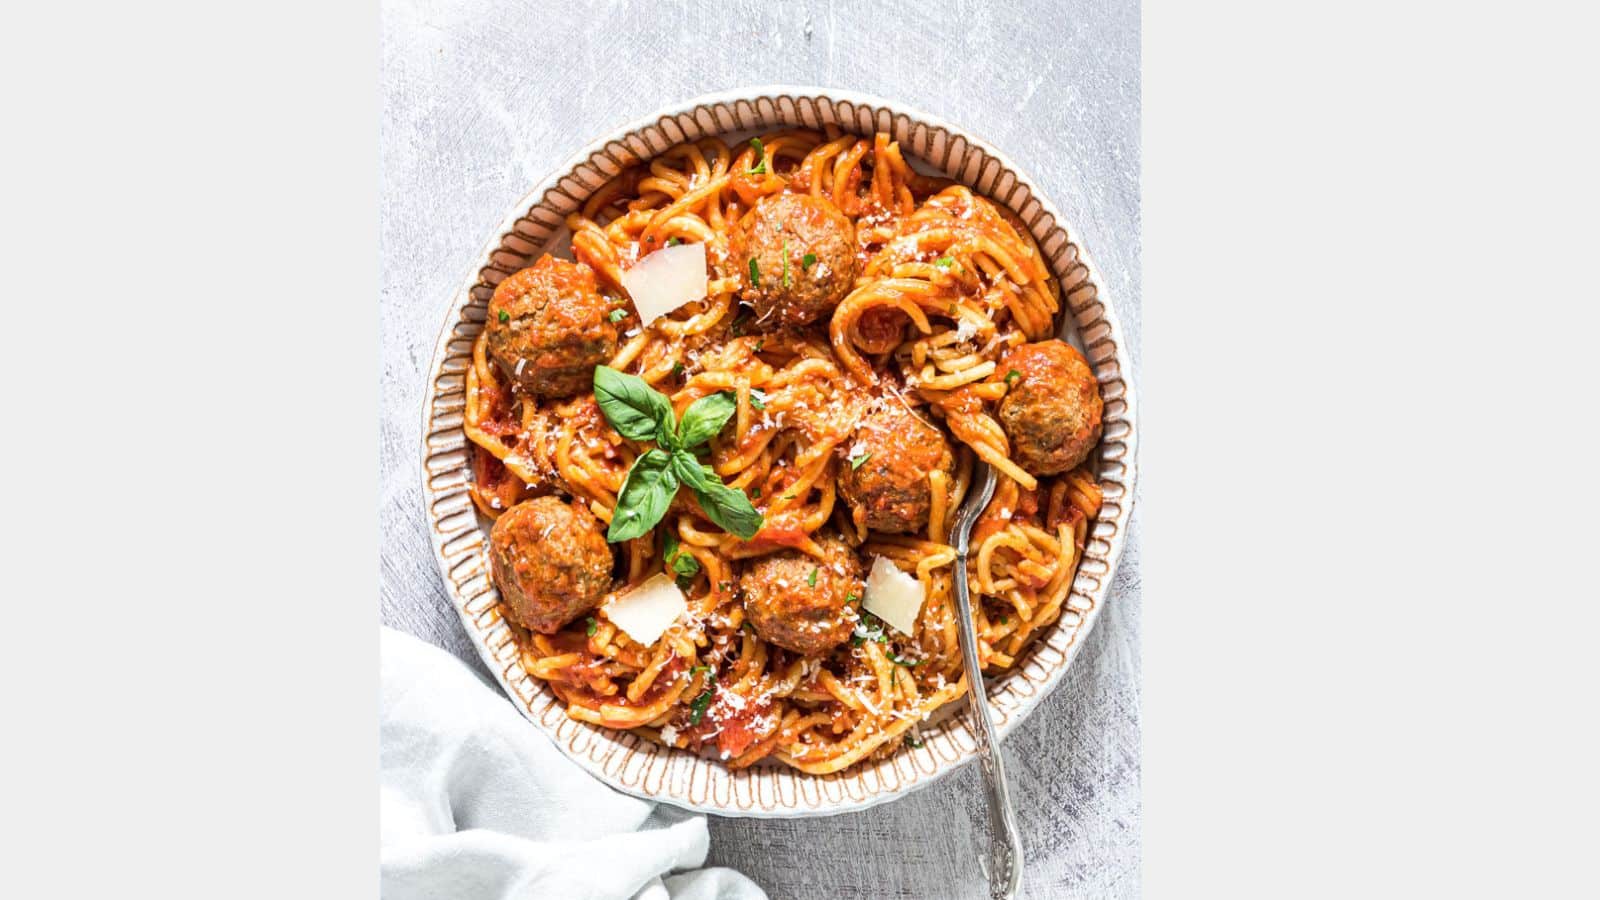 spaghetti and meatballs in a bowl